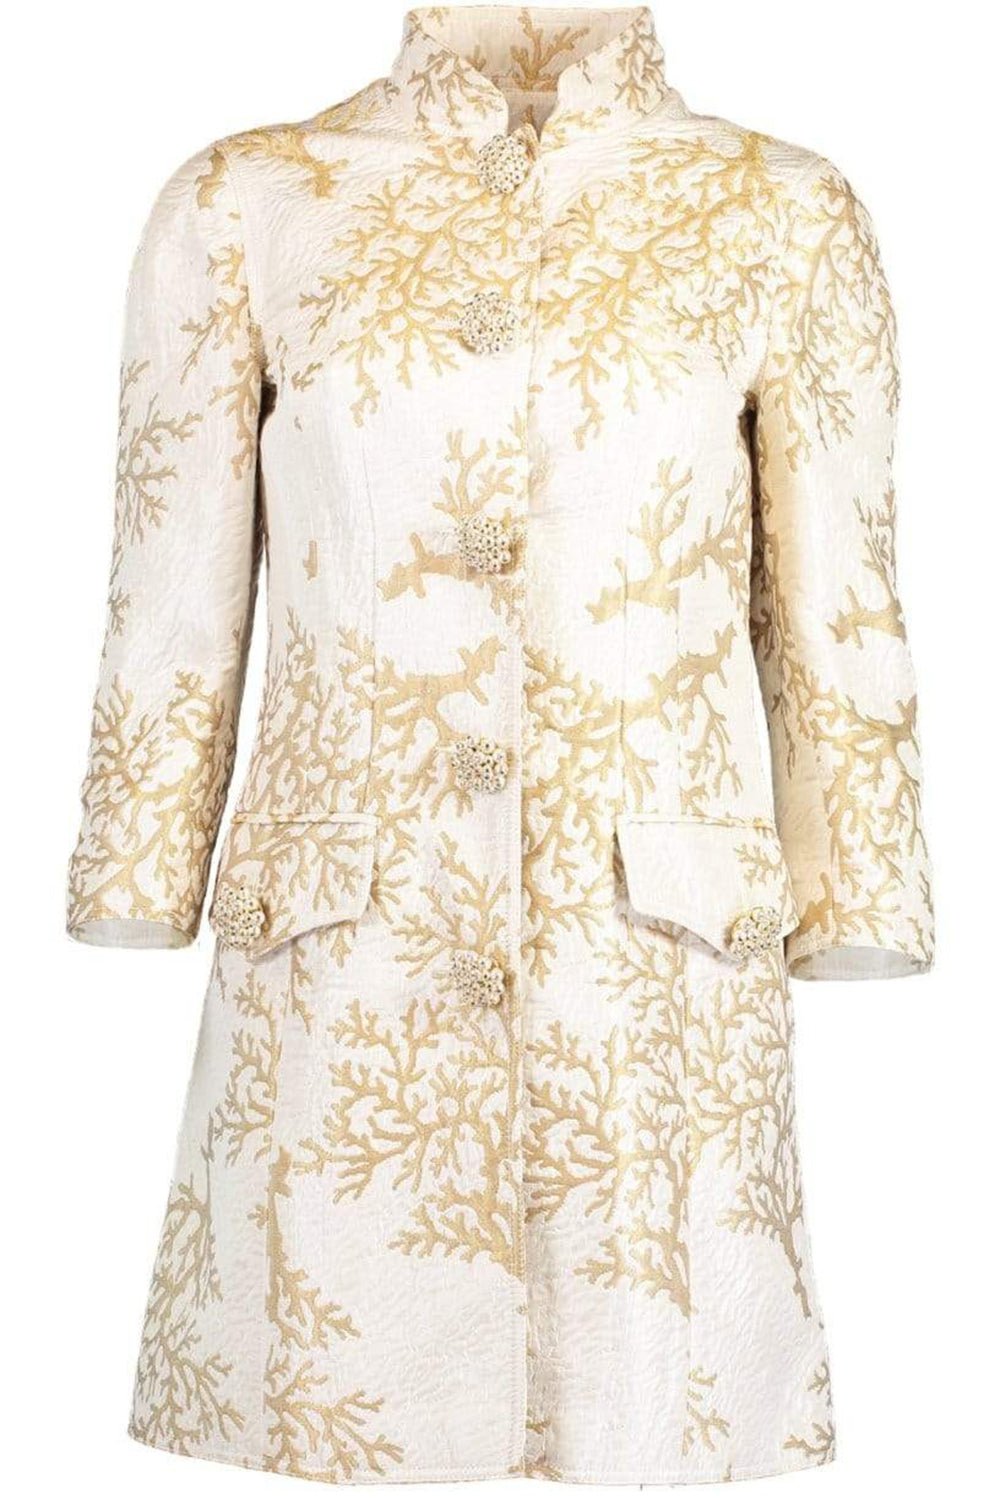 ANDREW GN-Brocade Coral Evening Jacket-GOLD